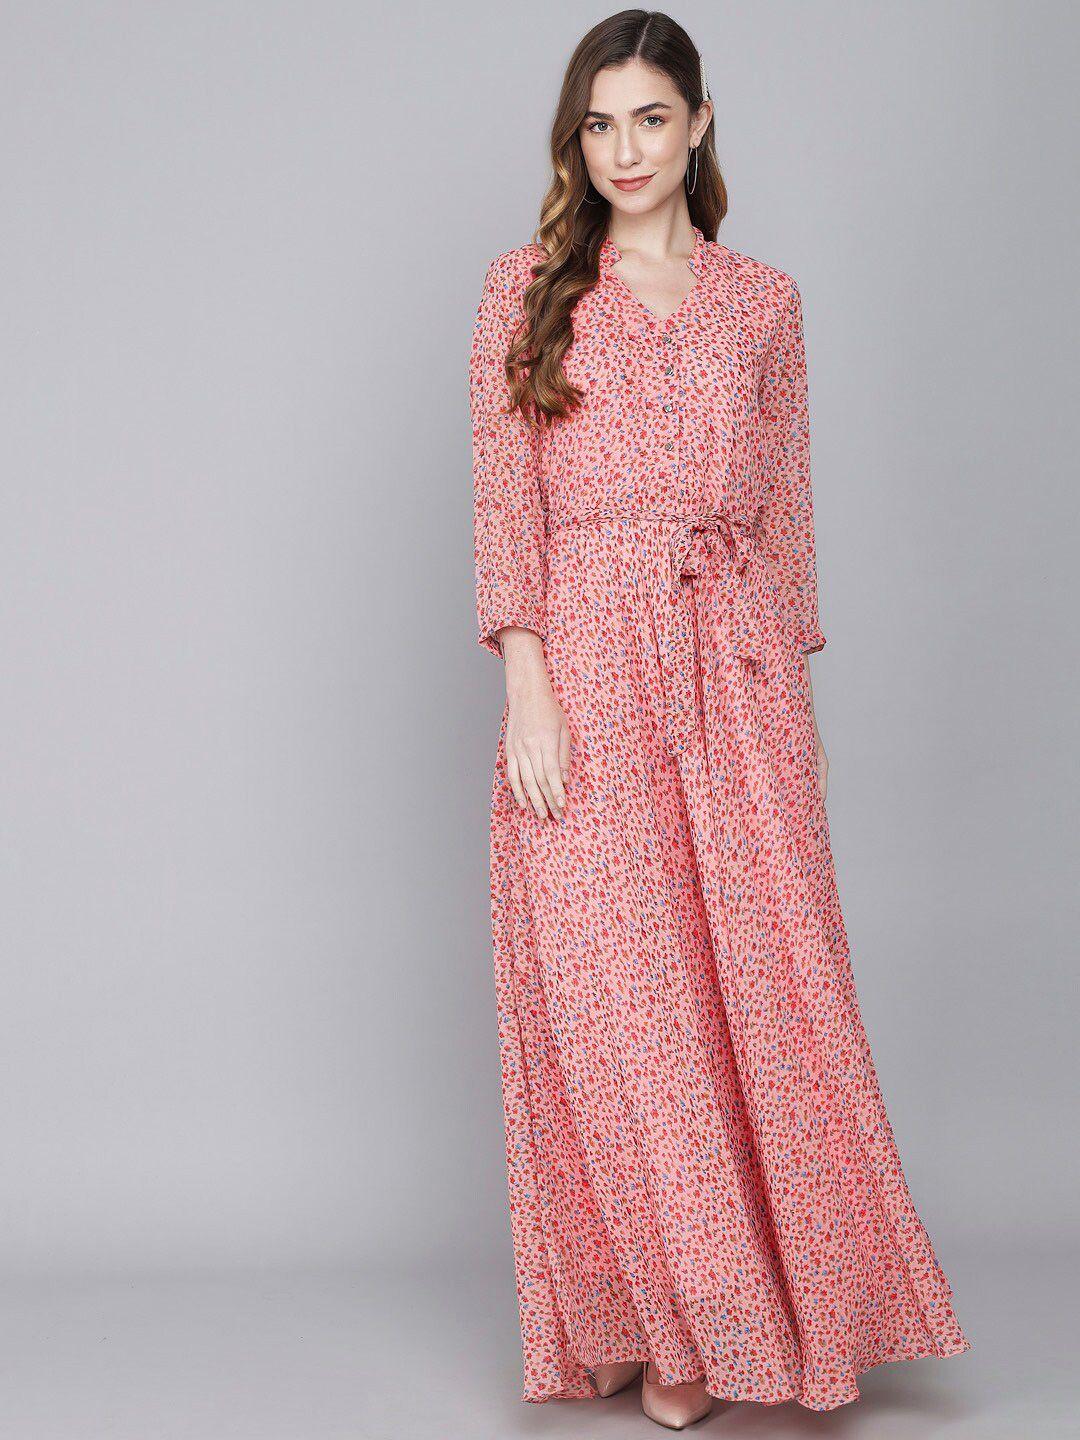 rudraaksha creations pink & chambray floral georgette maxi dress